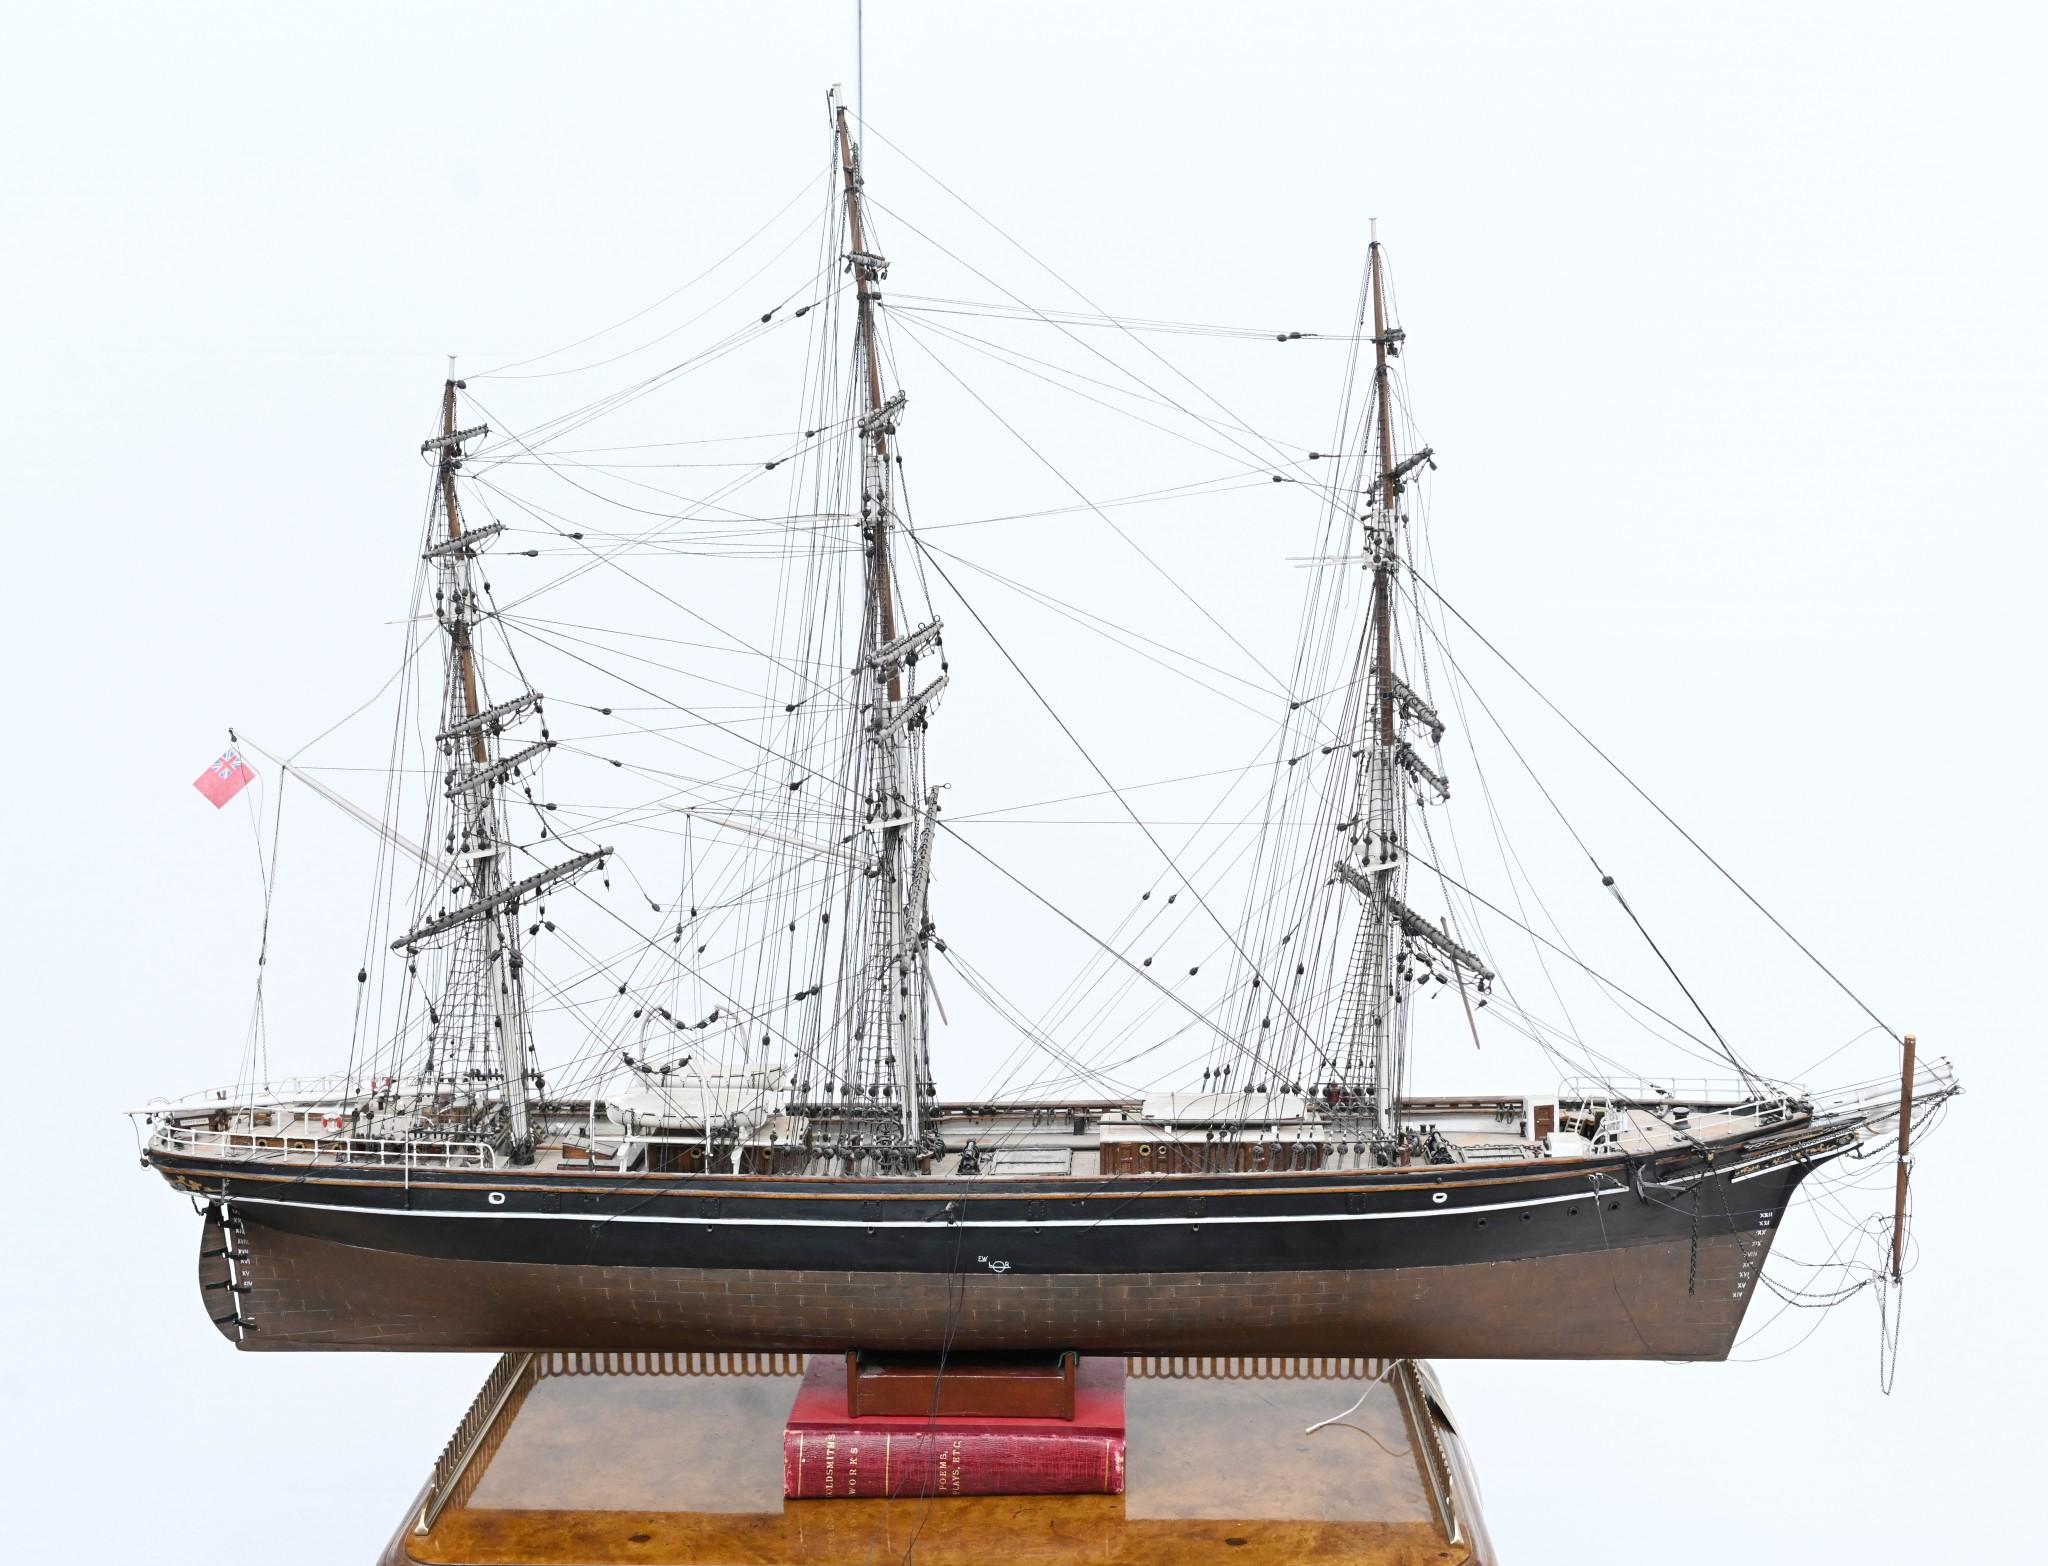 Fabulous scale model of a Clipper boat
This piece is Mid Century and the workmanship is very detailed
This is a scale and true model of the famous Cutty Sark
The Cutty Sark was a famous tea clipper and can be still viewed in Greewich, London